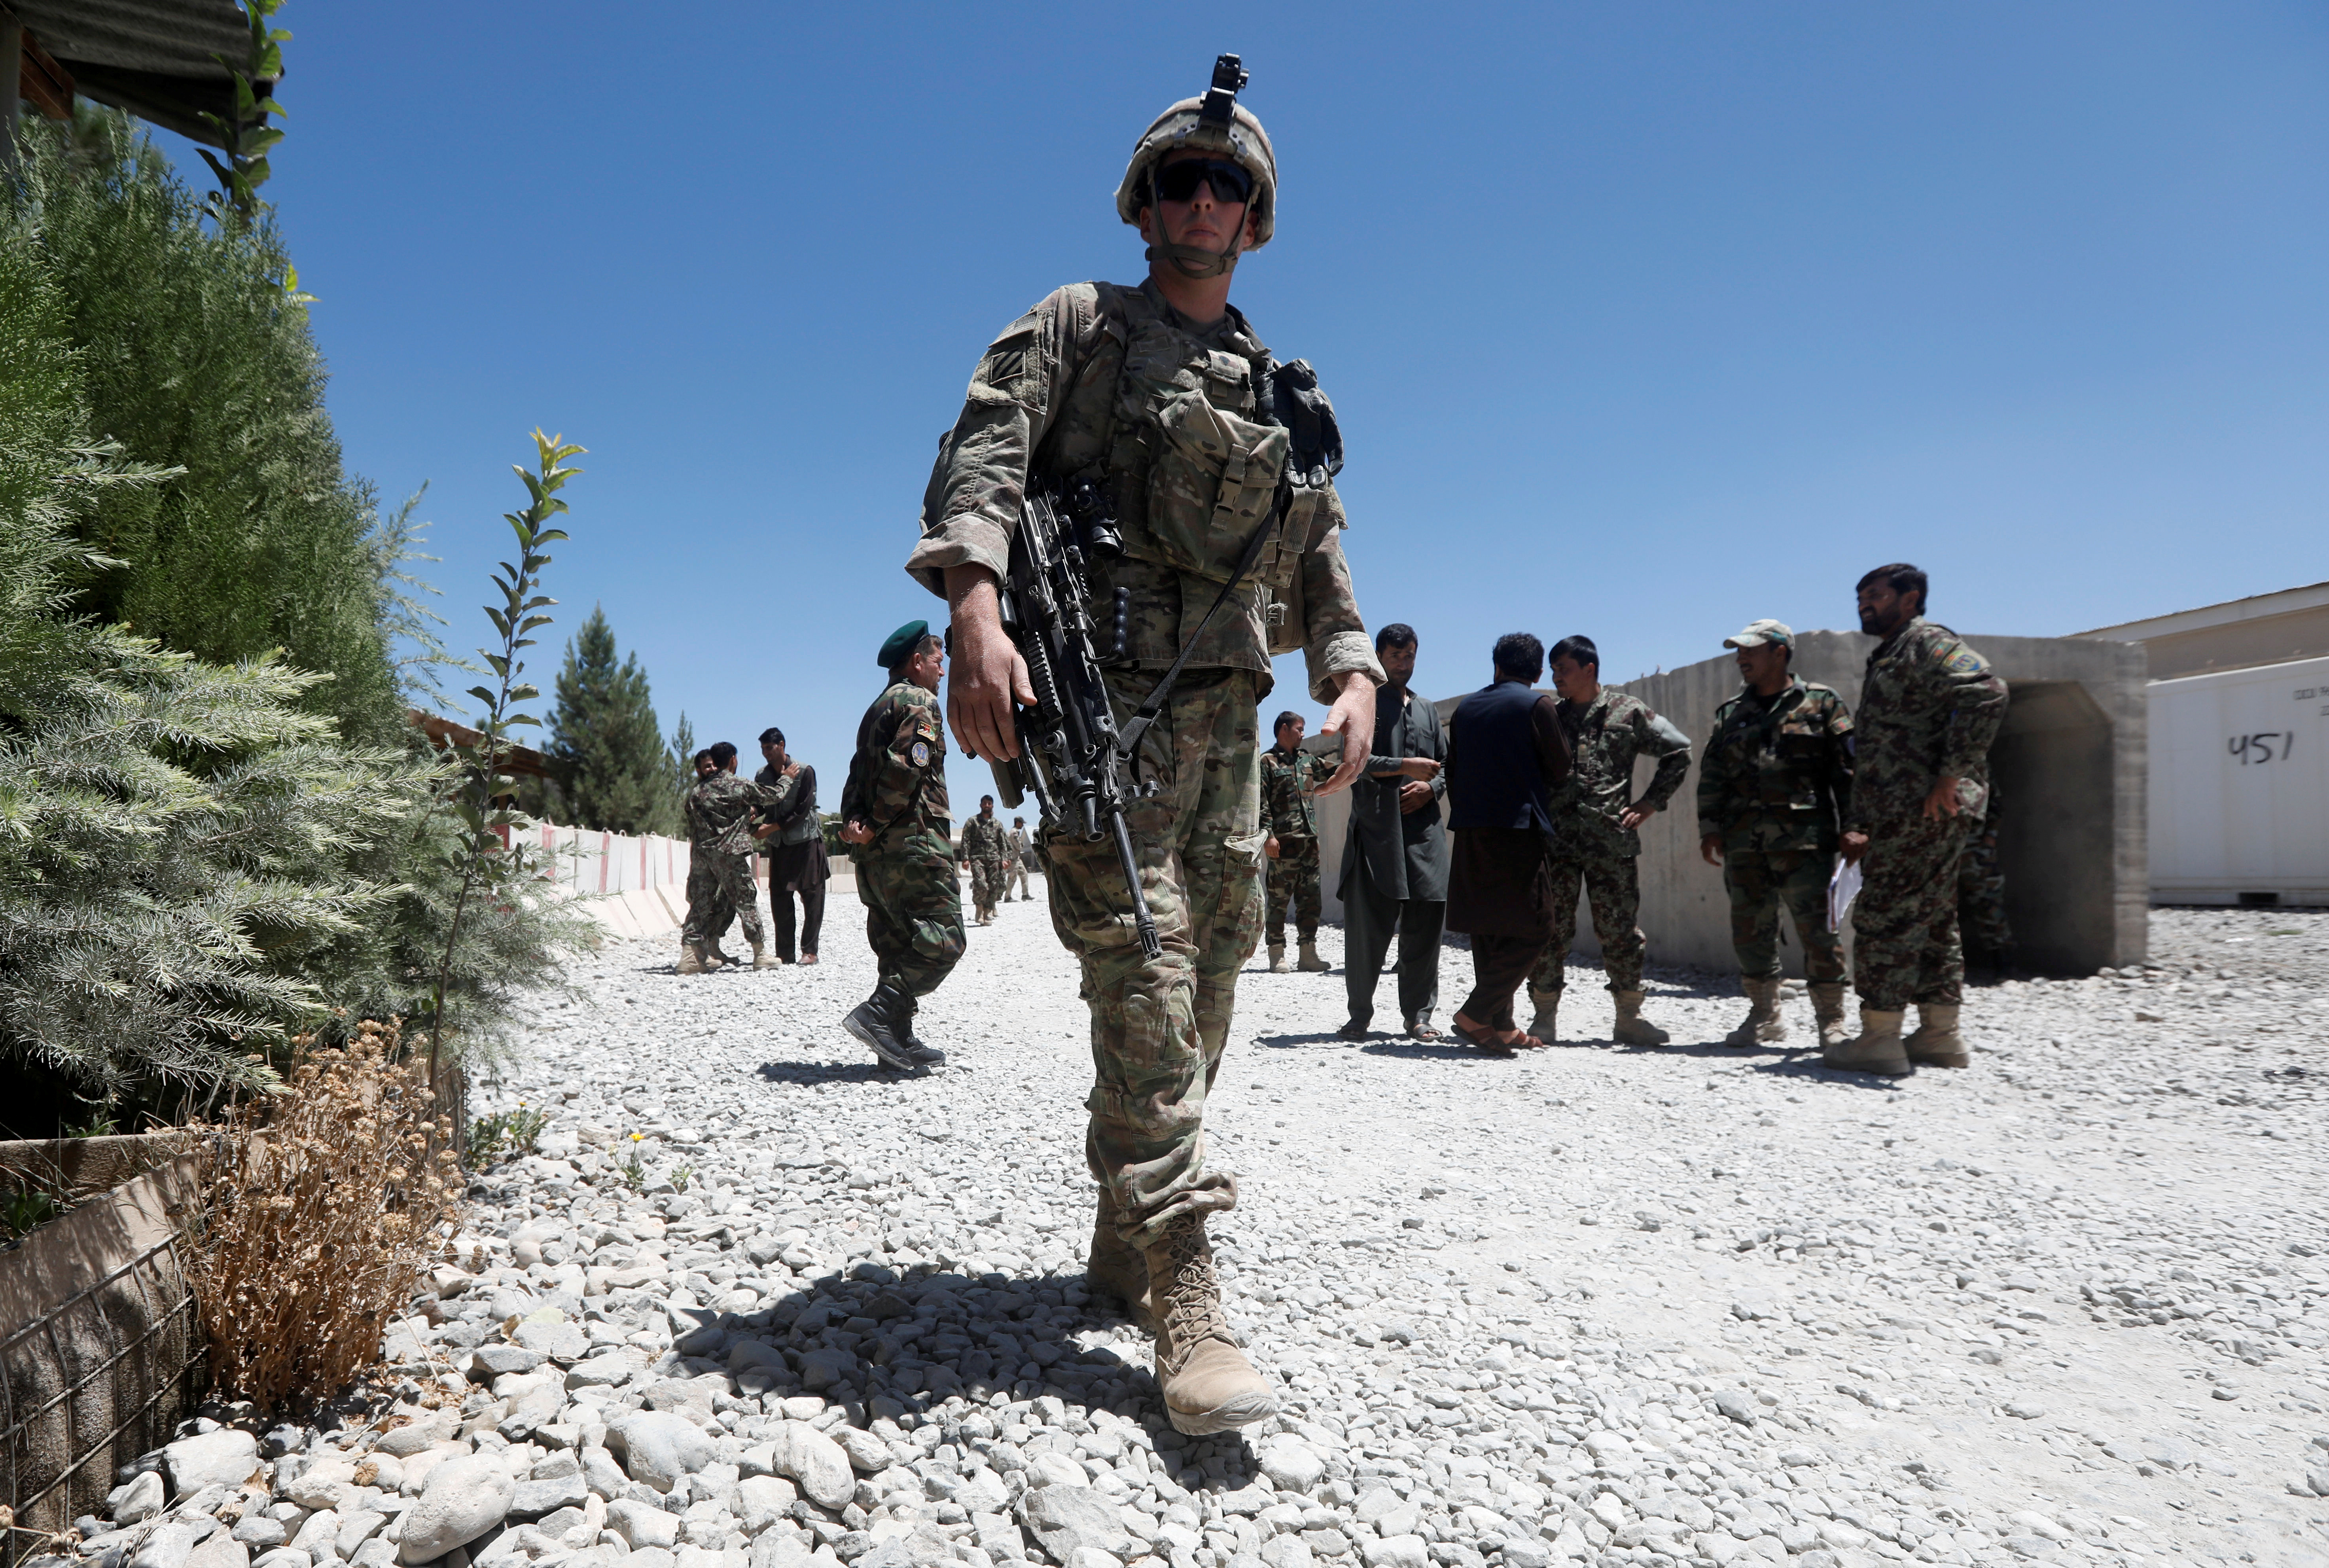 An U.S. soldier keeps watch at an Afghan National Army (ANA) base in Logar province, Afghanistan